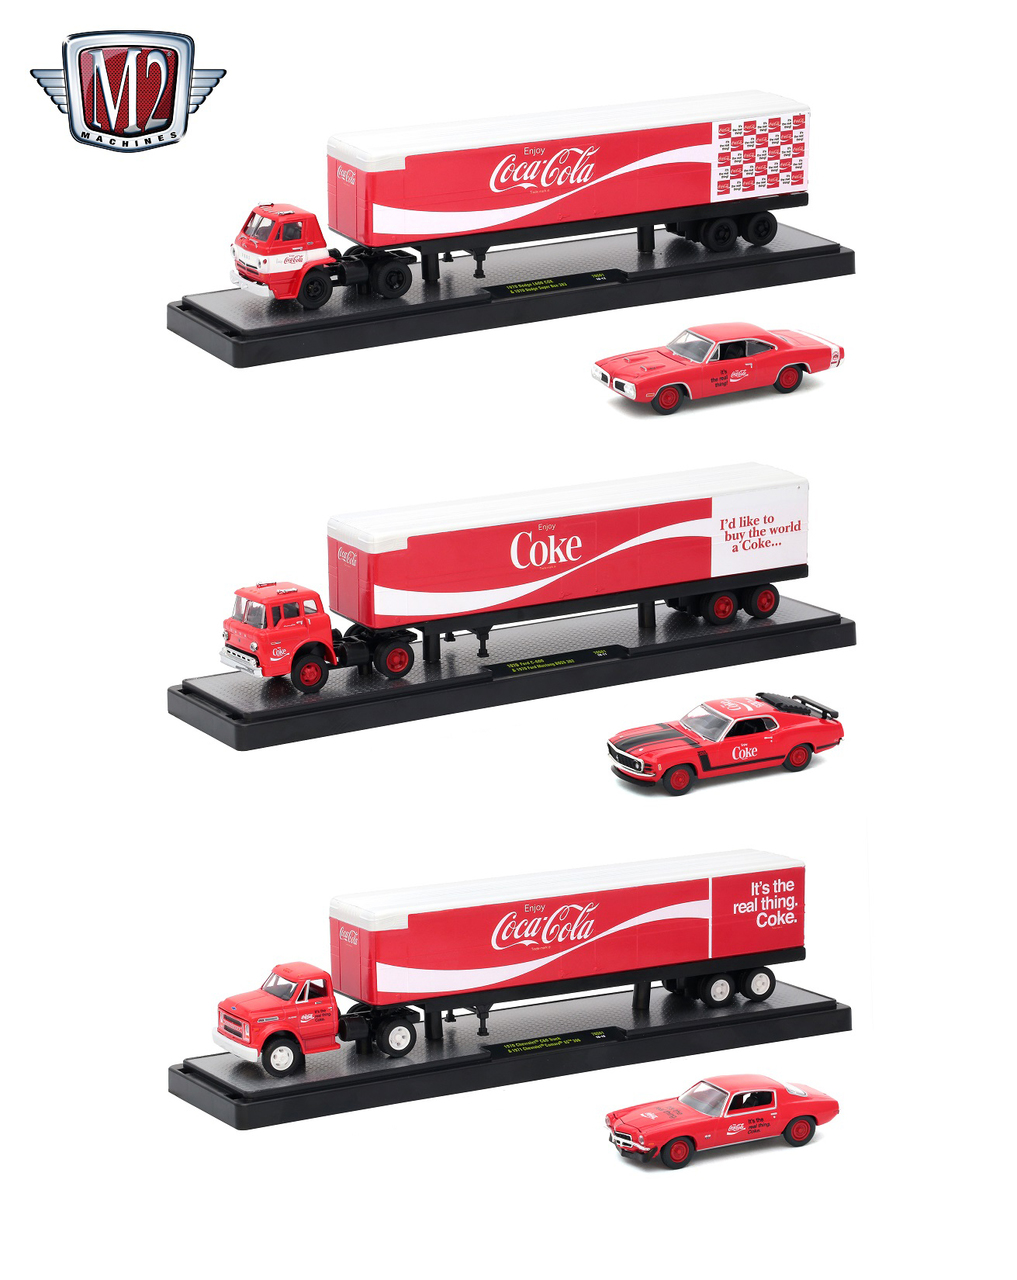 Auto Haulers "coca-cola" Release 3 Trucks And Cars Set 1/64 Diecast Models By M2 Machines